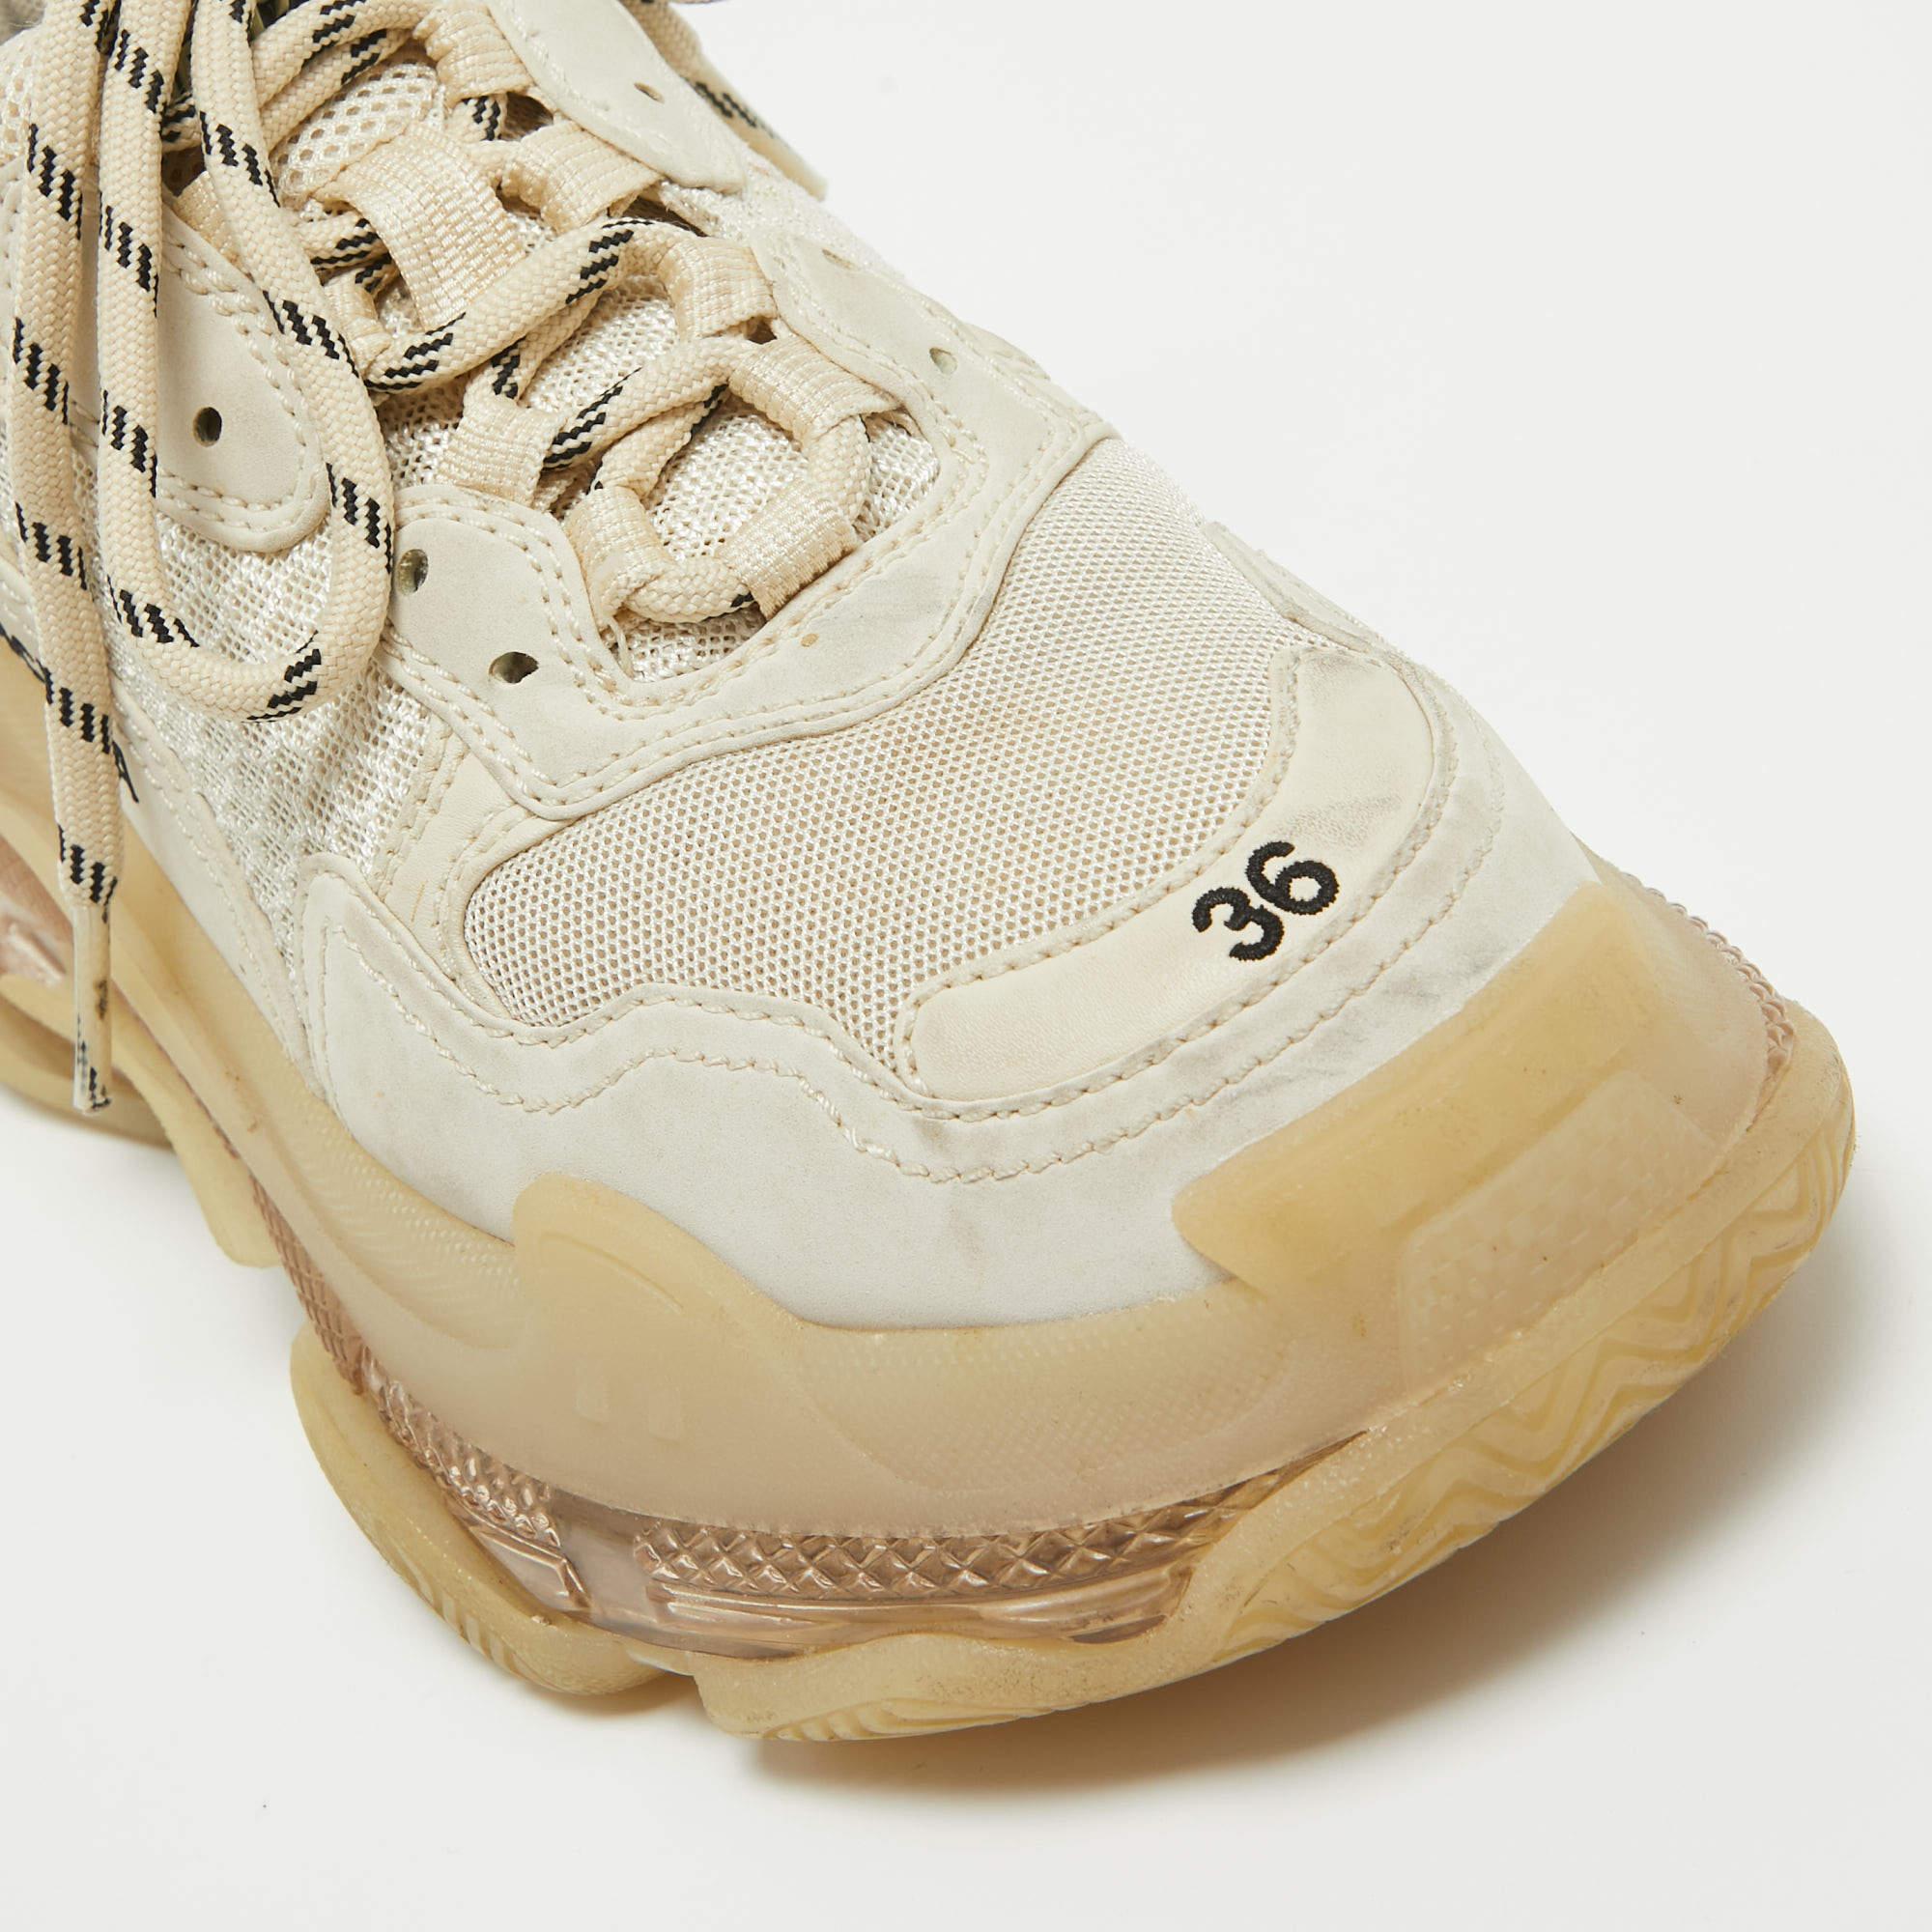 Balenciaga Cream Mesh and Faux Leather Triple S Clear Sole Sneakers Size 36 2